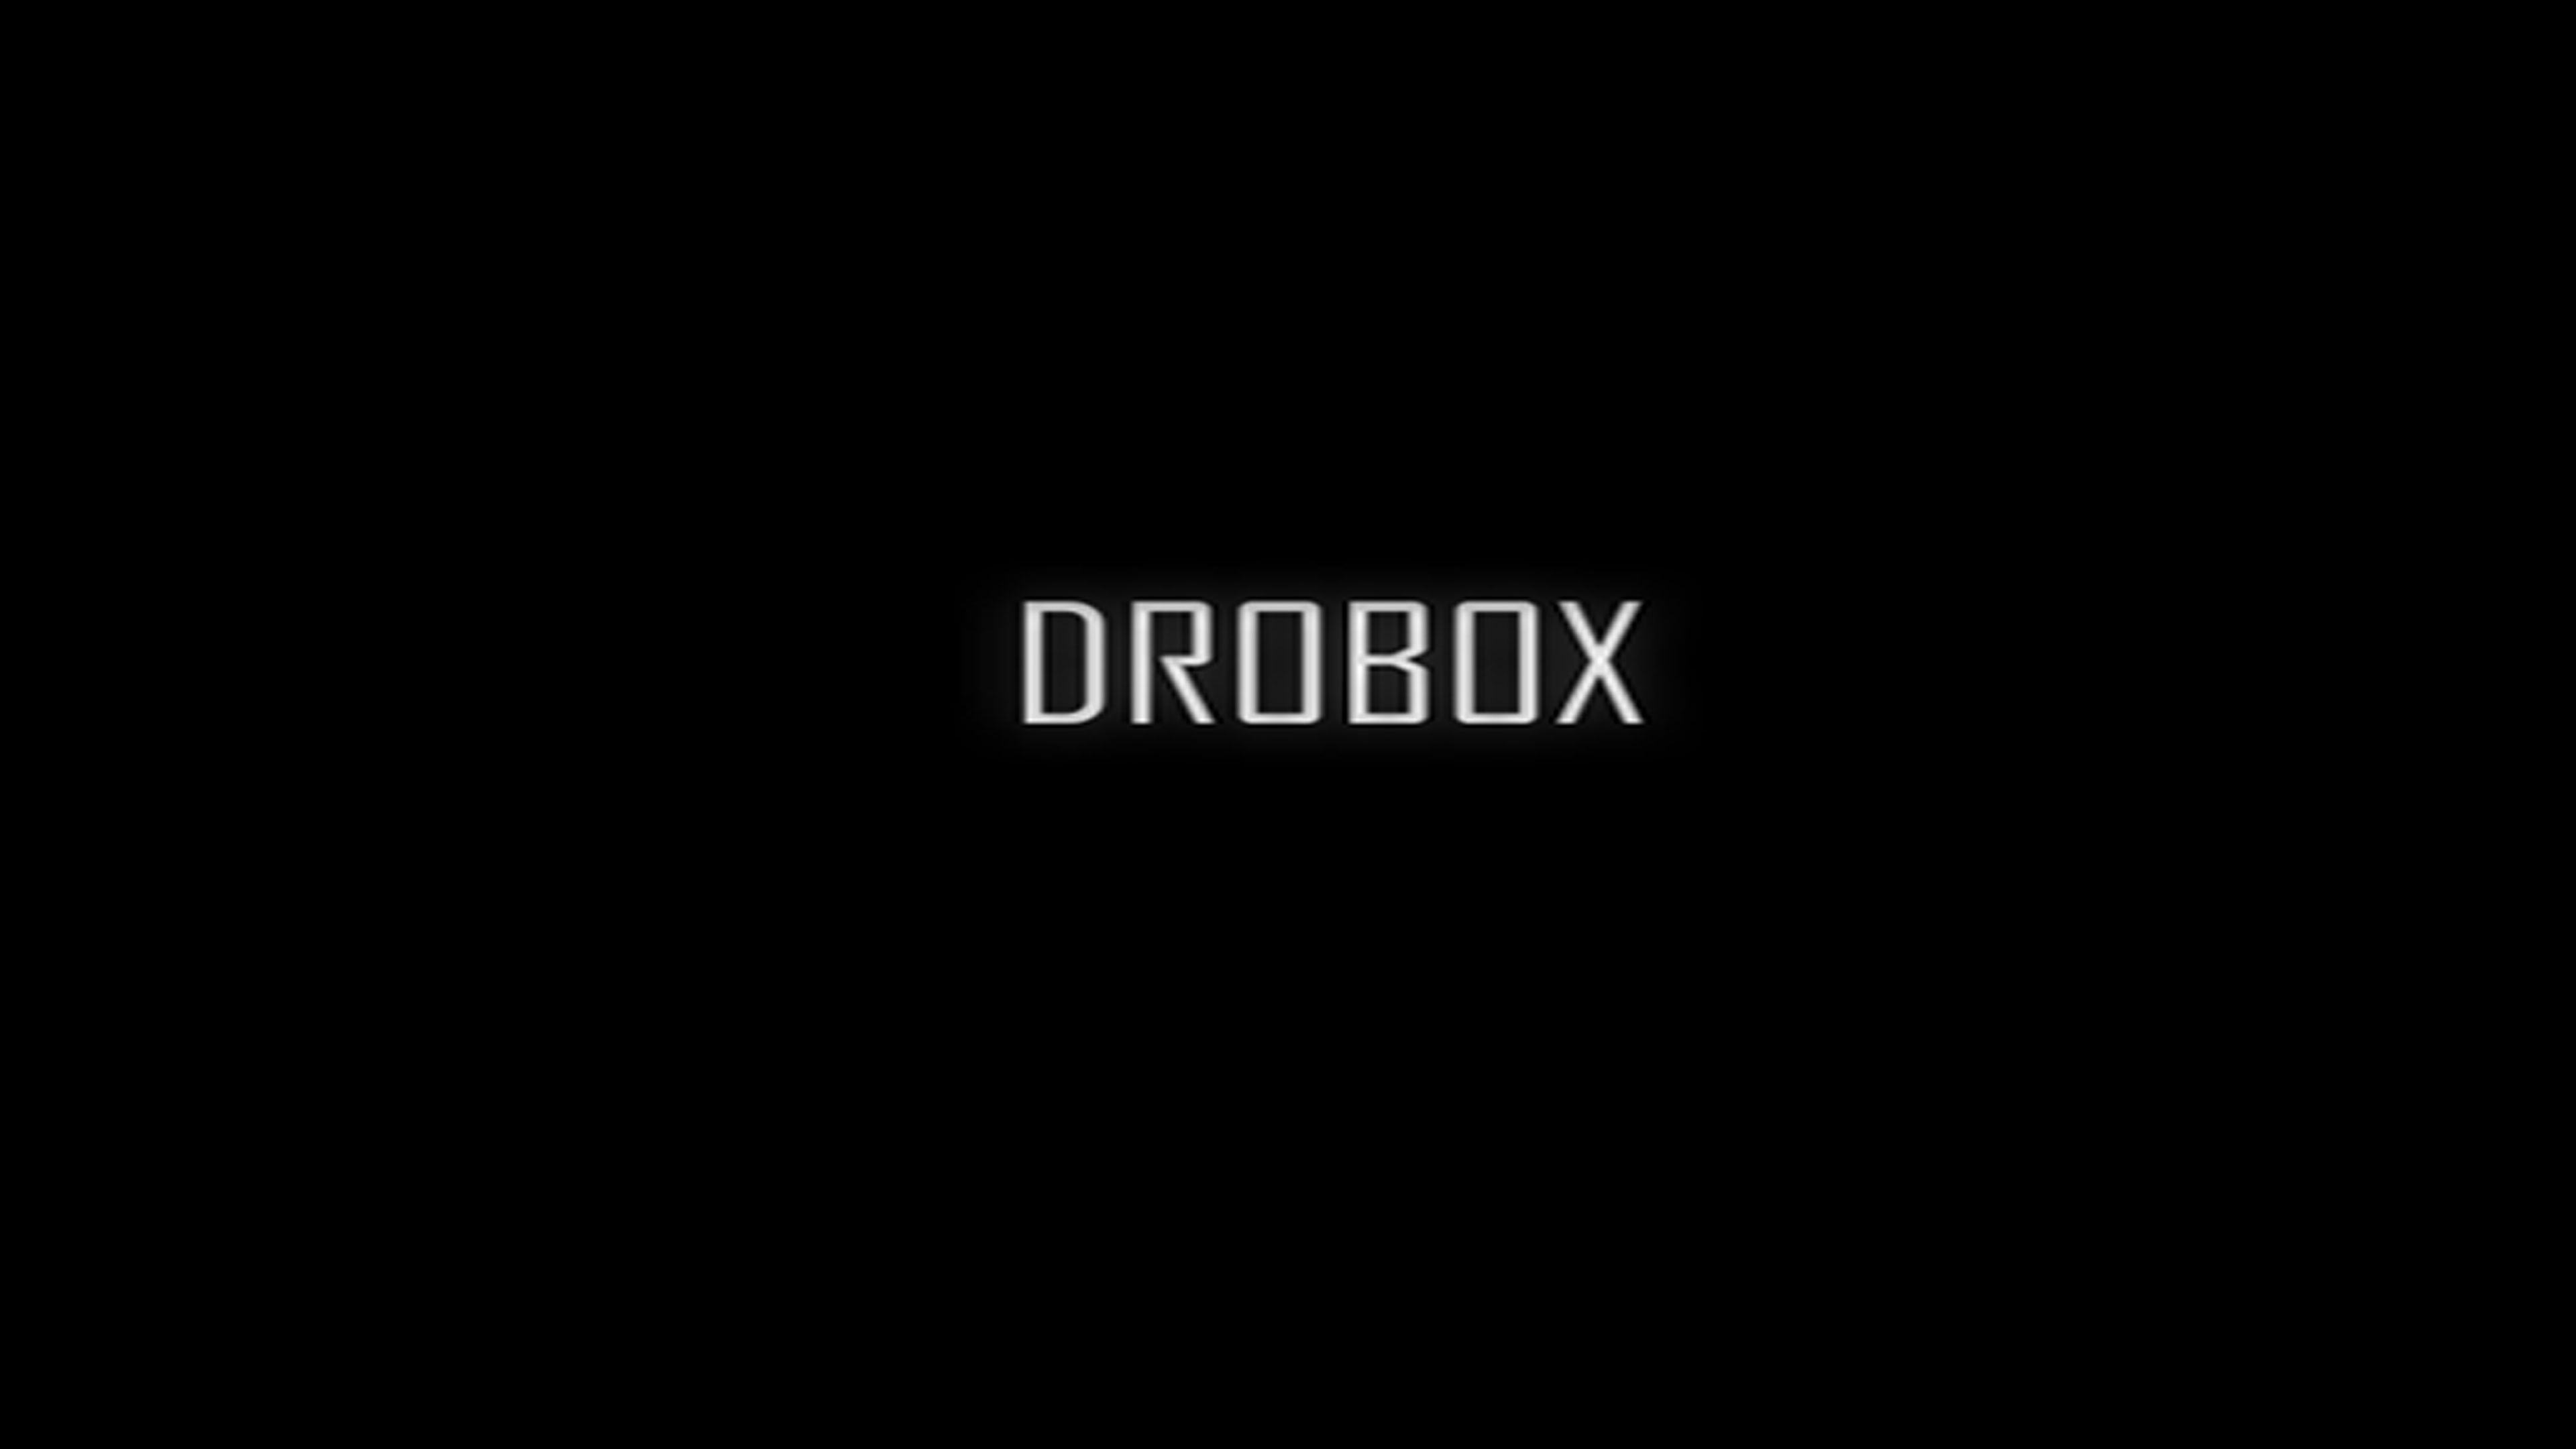 Android Apps by DROBOX on Google Play